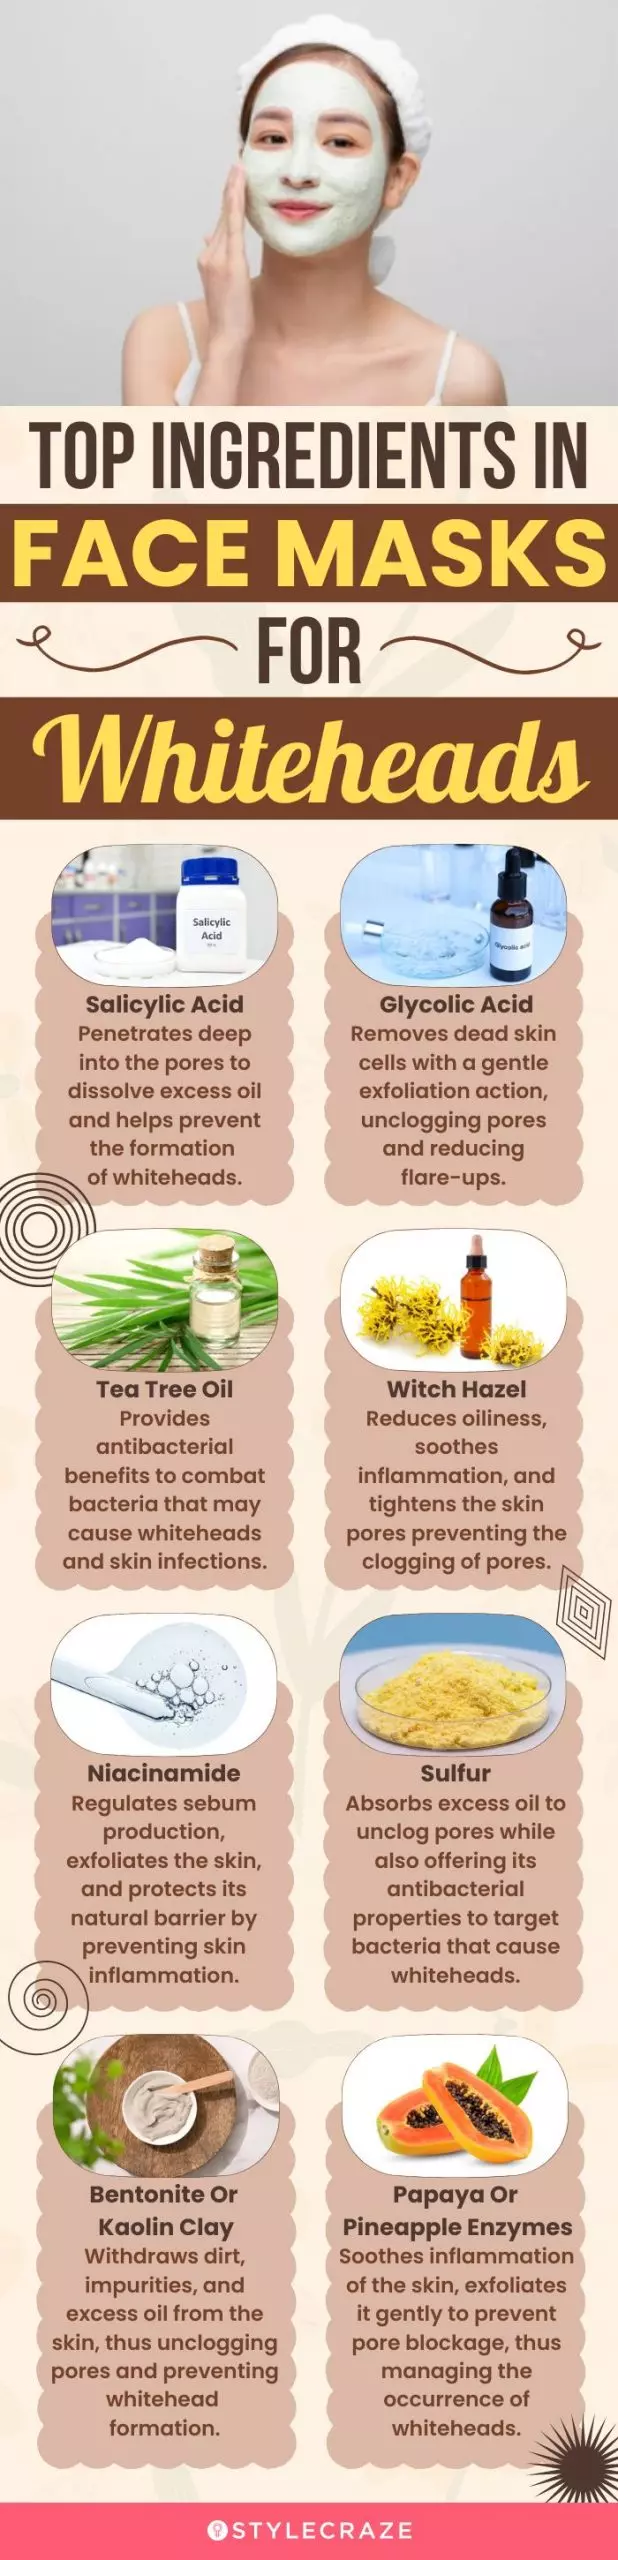 Top ingredients In Face Masks For Whiteheads (infographic)